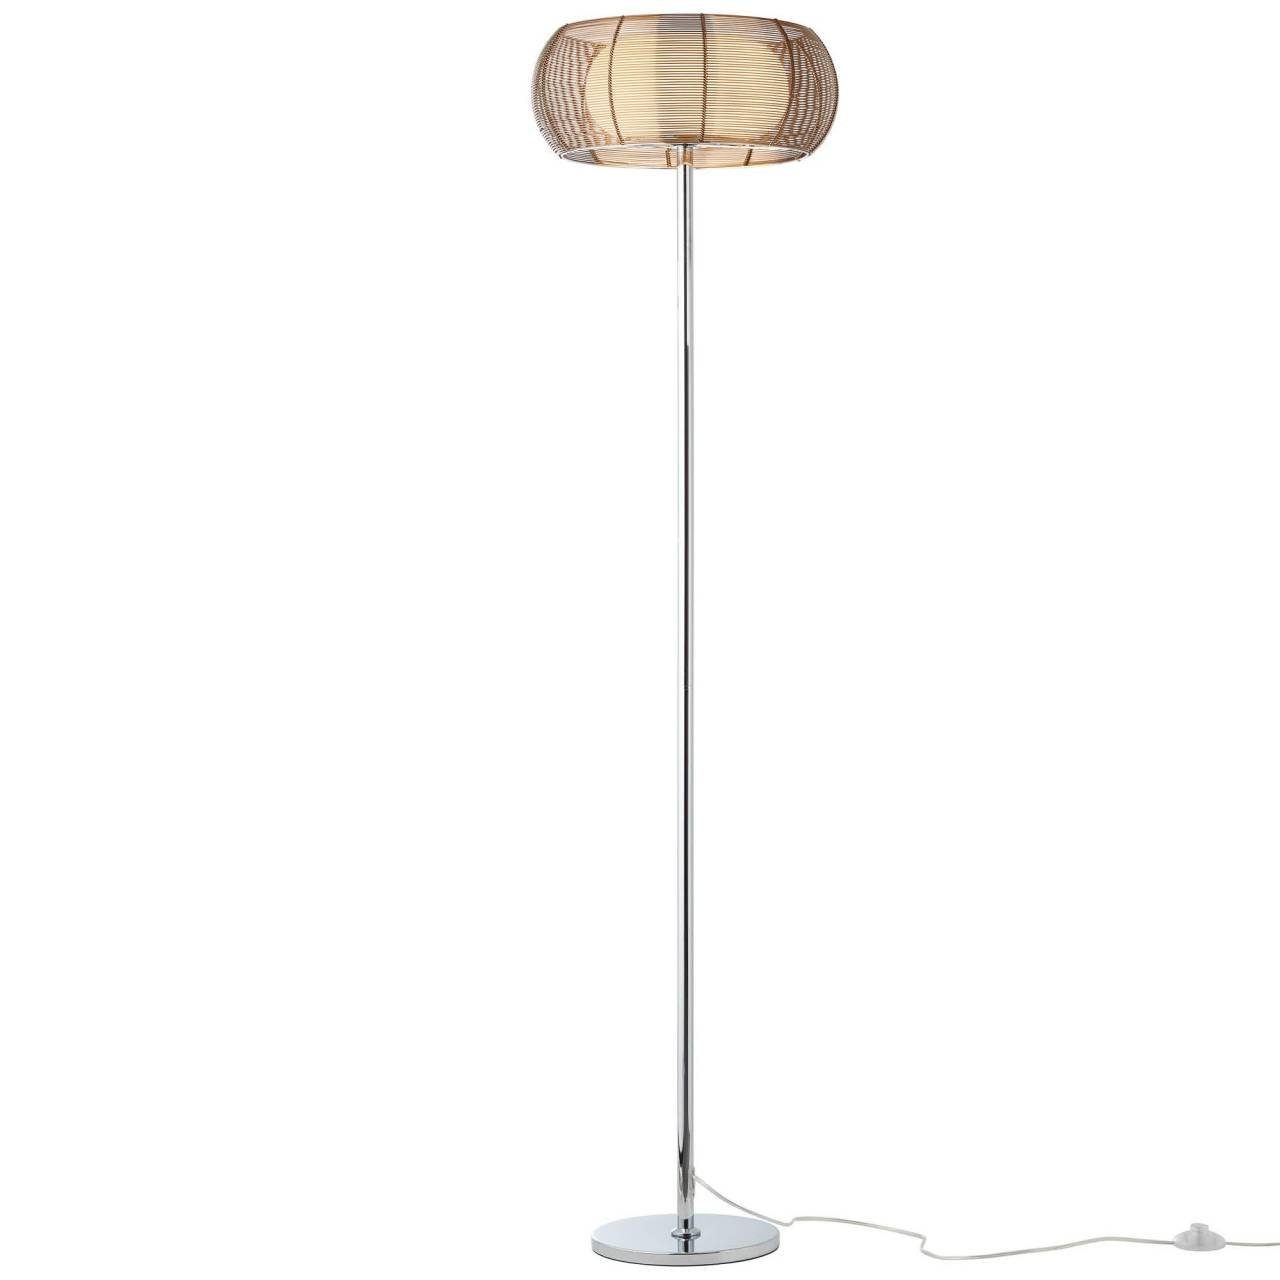 Standleuchte A60, 30W, bronze/chrom Relax, g.f. 2x Lampe Relax 2flg No Stehlampe E27, Brilliant